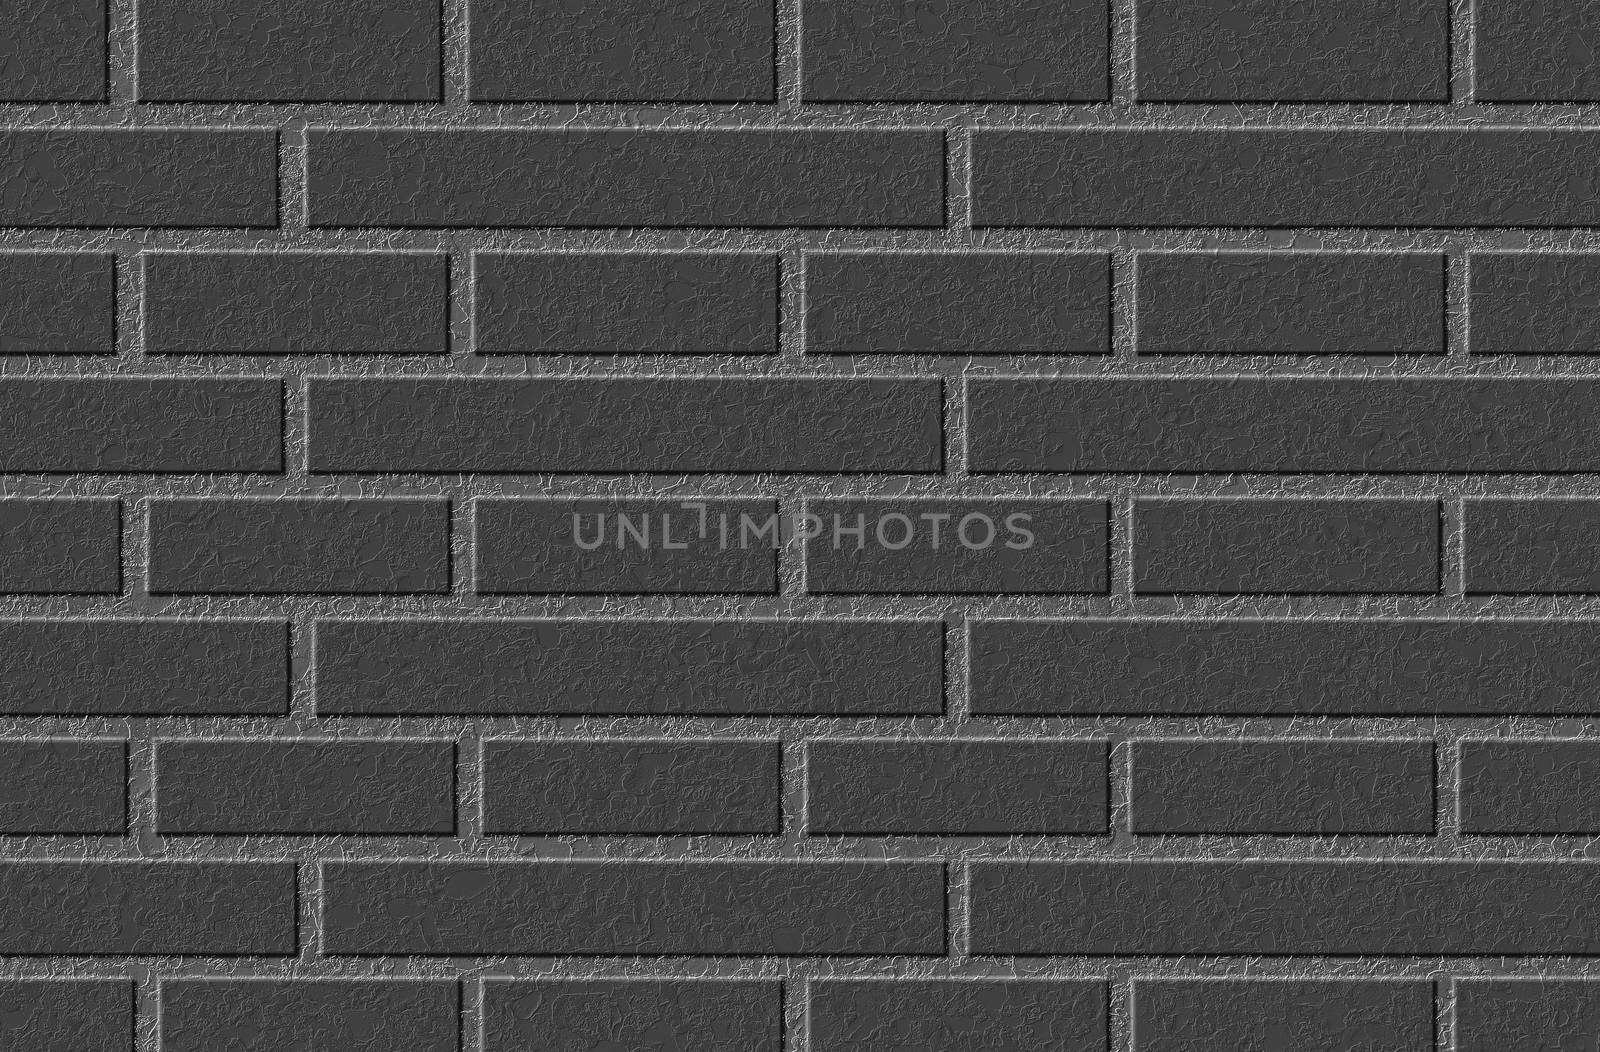 Black brick wall. Black and white textures. Abstract background of brick wall